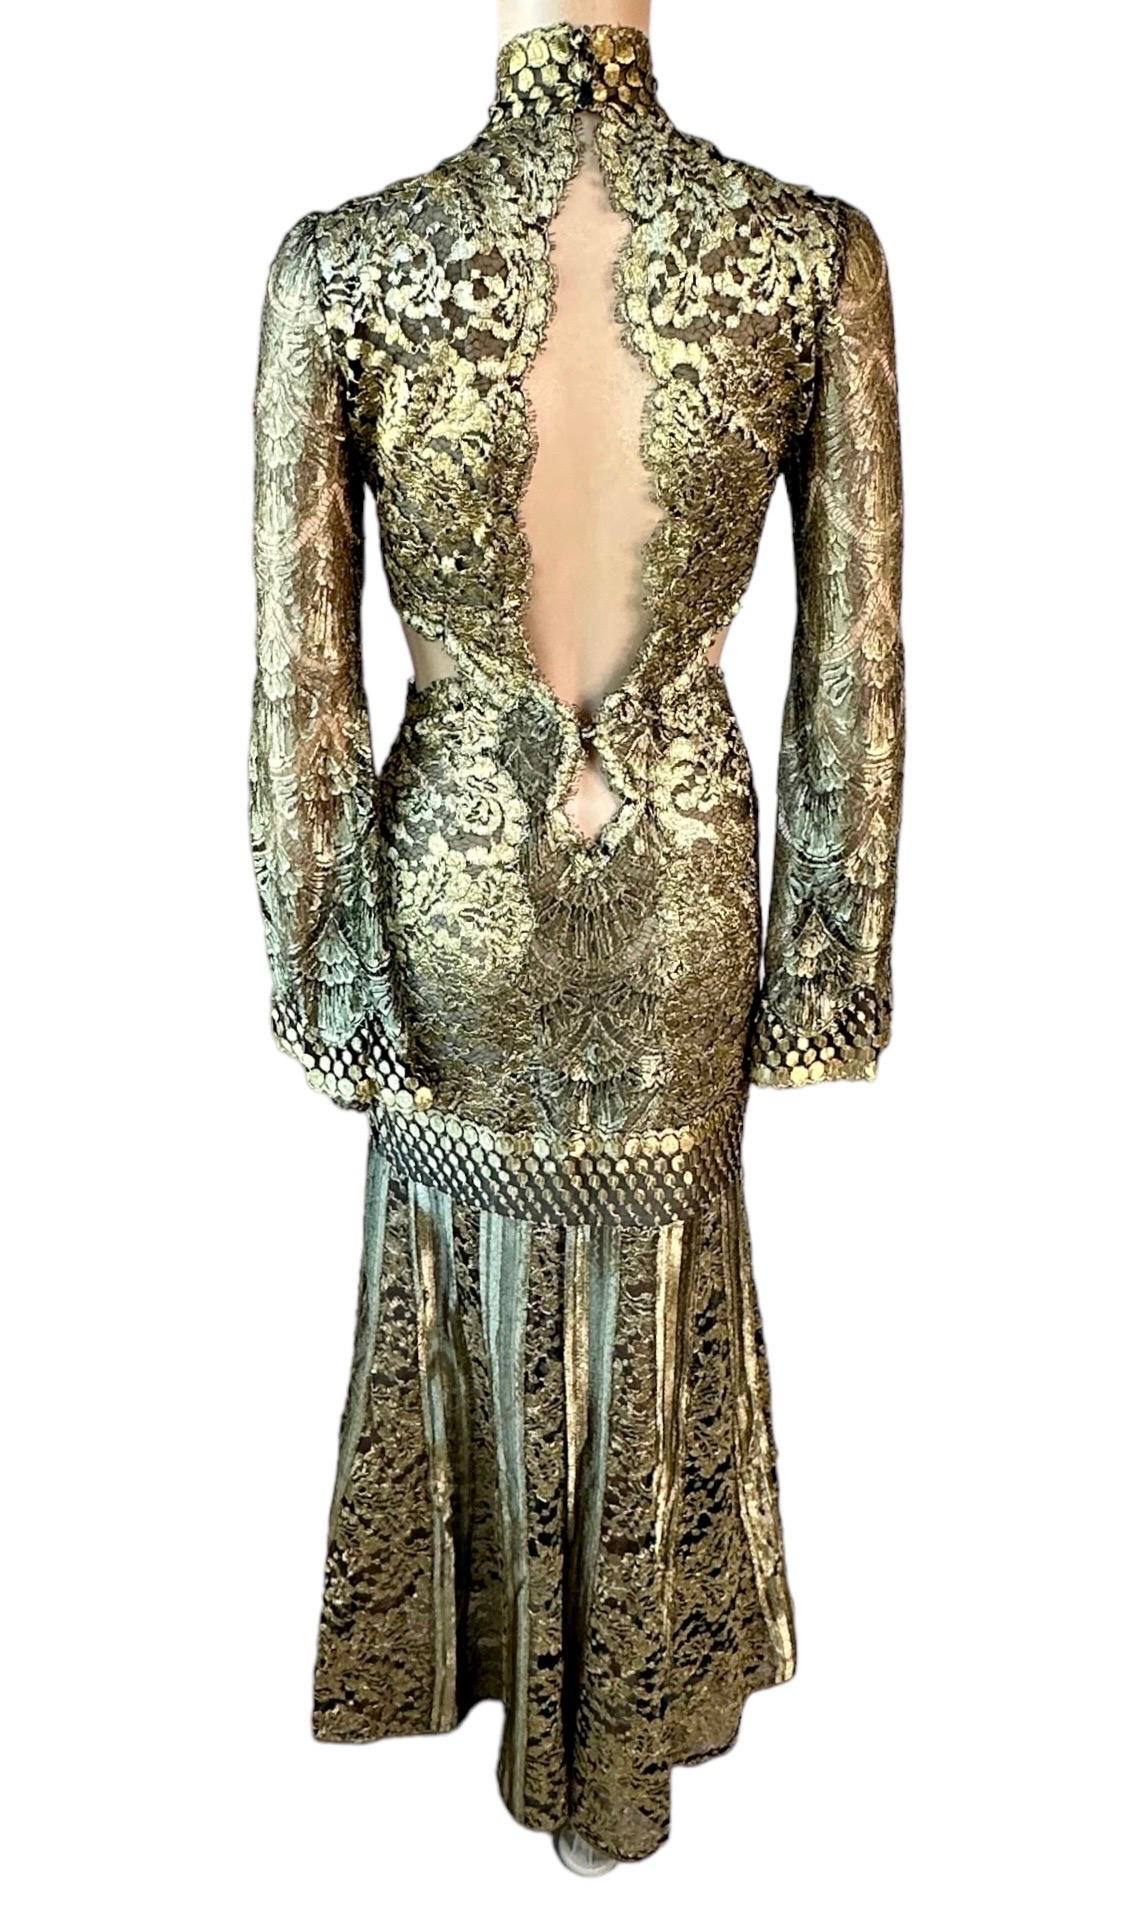 Brown Roberto Cavalli F/W 2016 Runway Gold Sheer Lace Evening Dress Gown For Sale